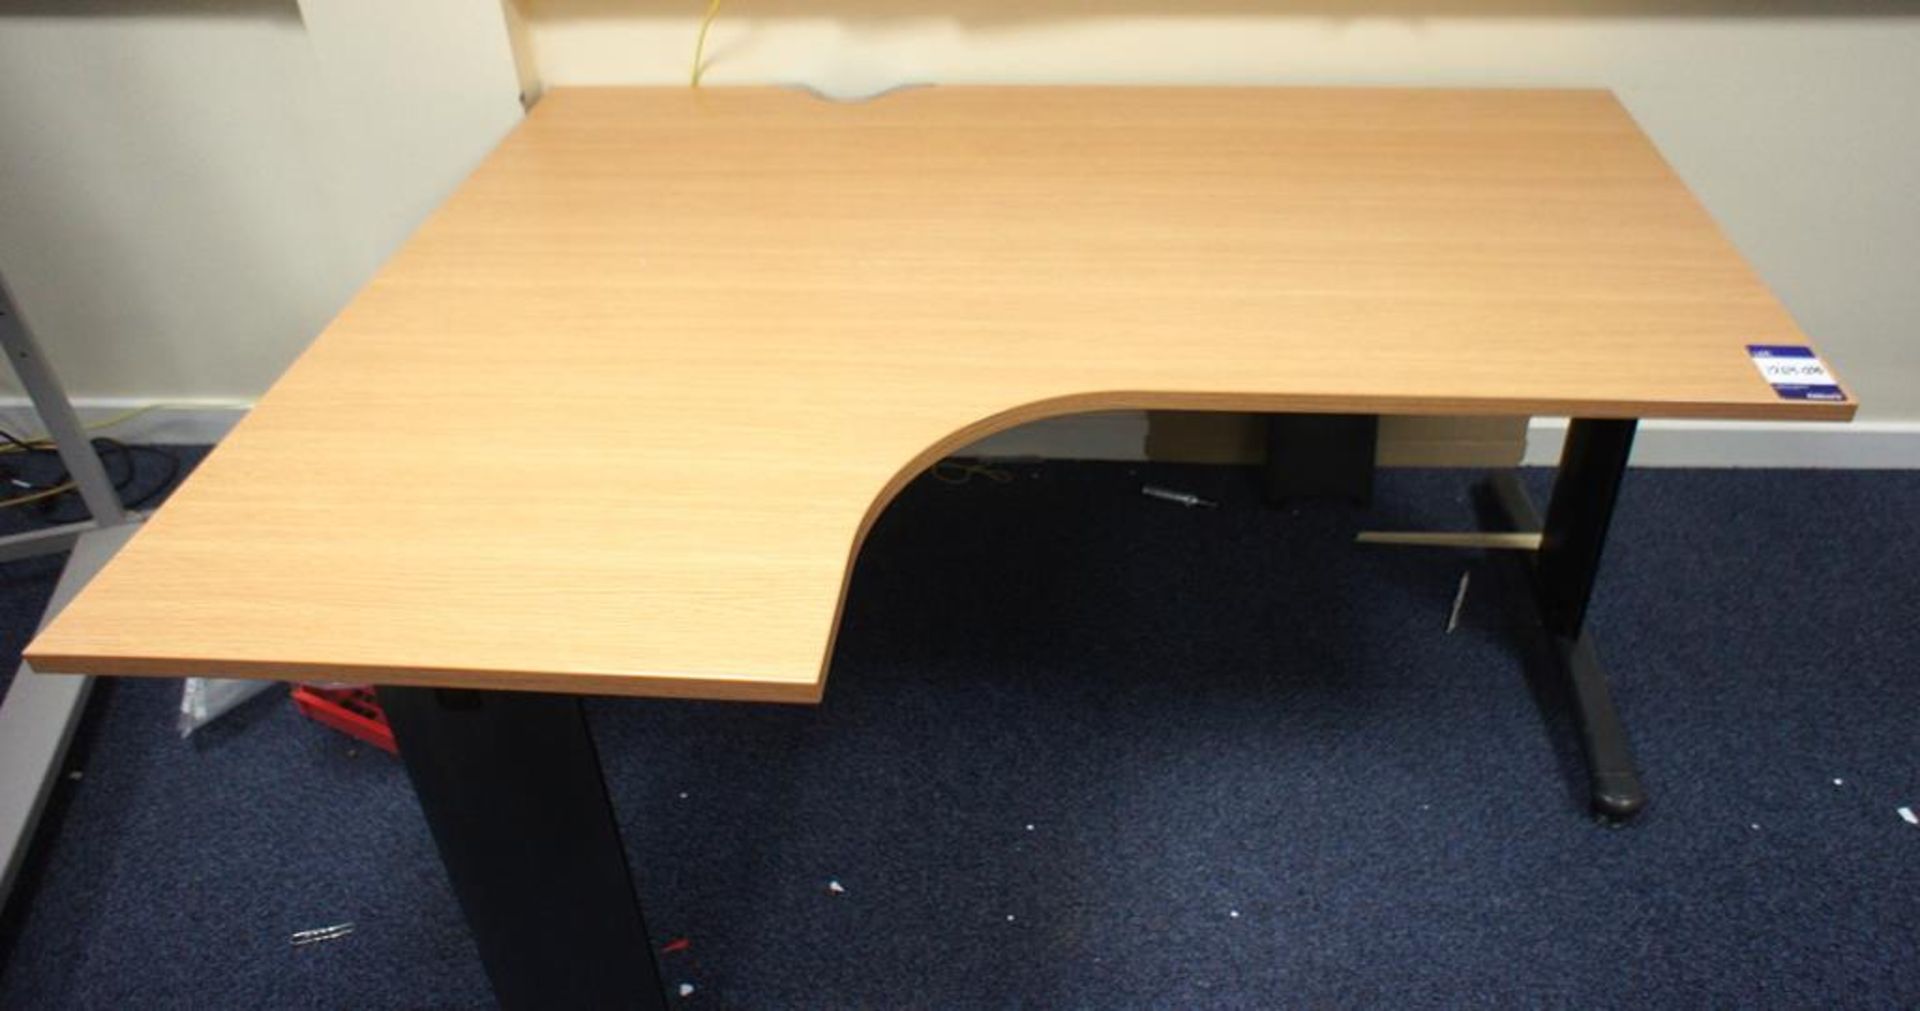 * Medium Oak L/H Radius Desk Photographs are provided for example purposes only and do not represent